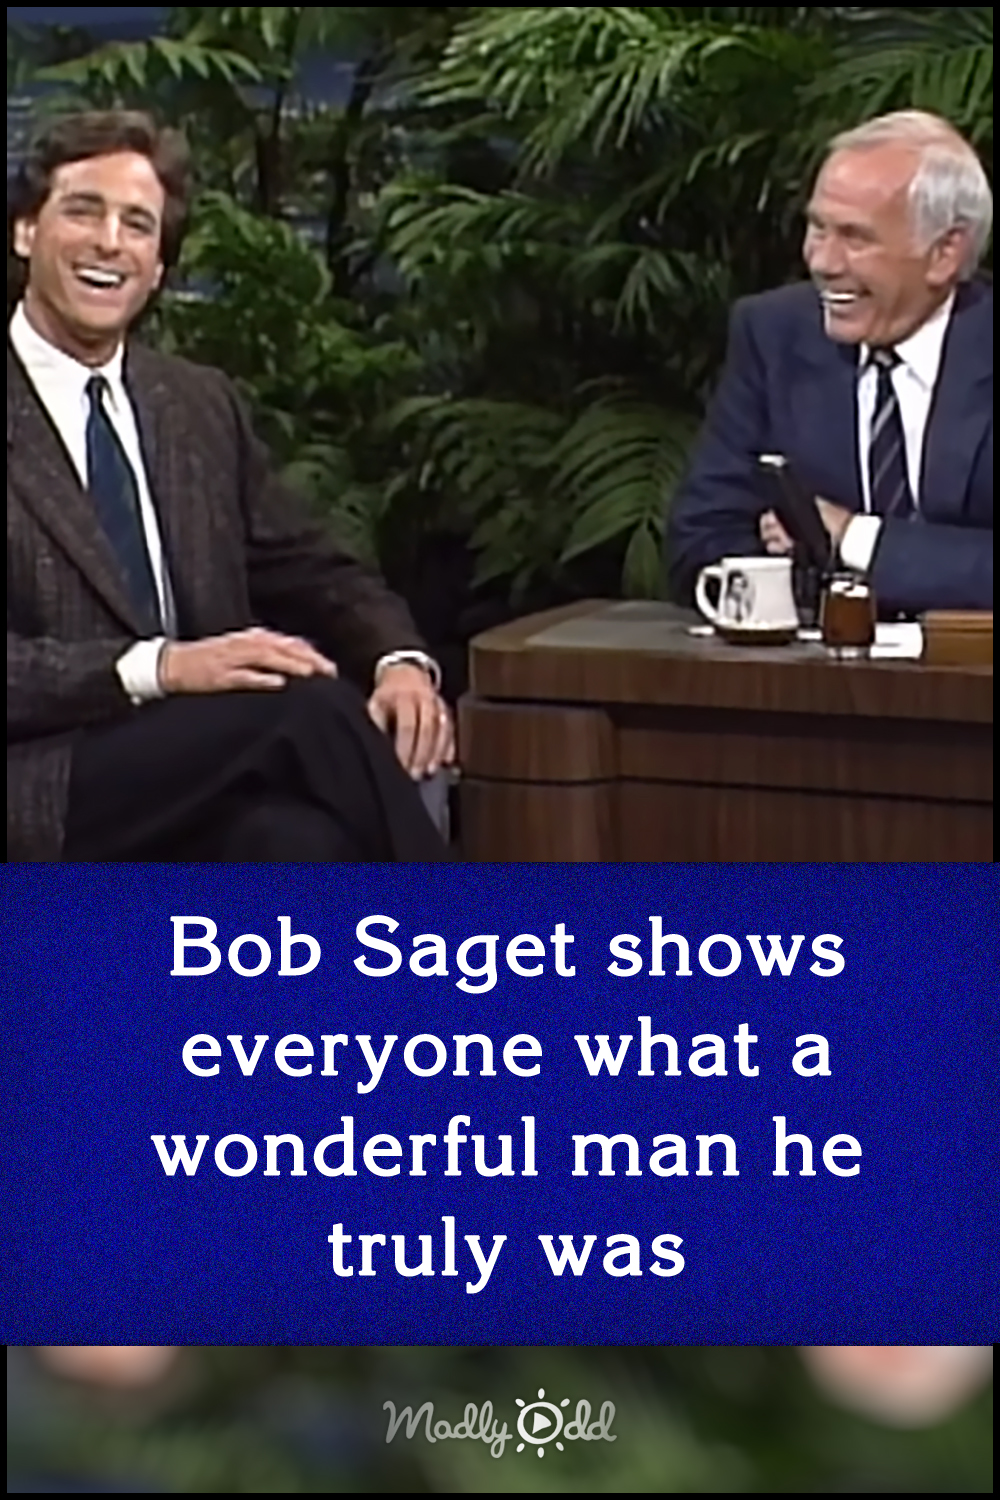 Bob Saget shows everyone what a wonderful man he truly was